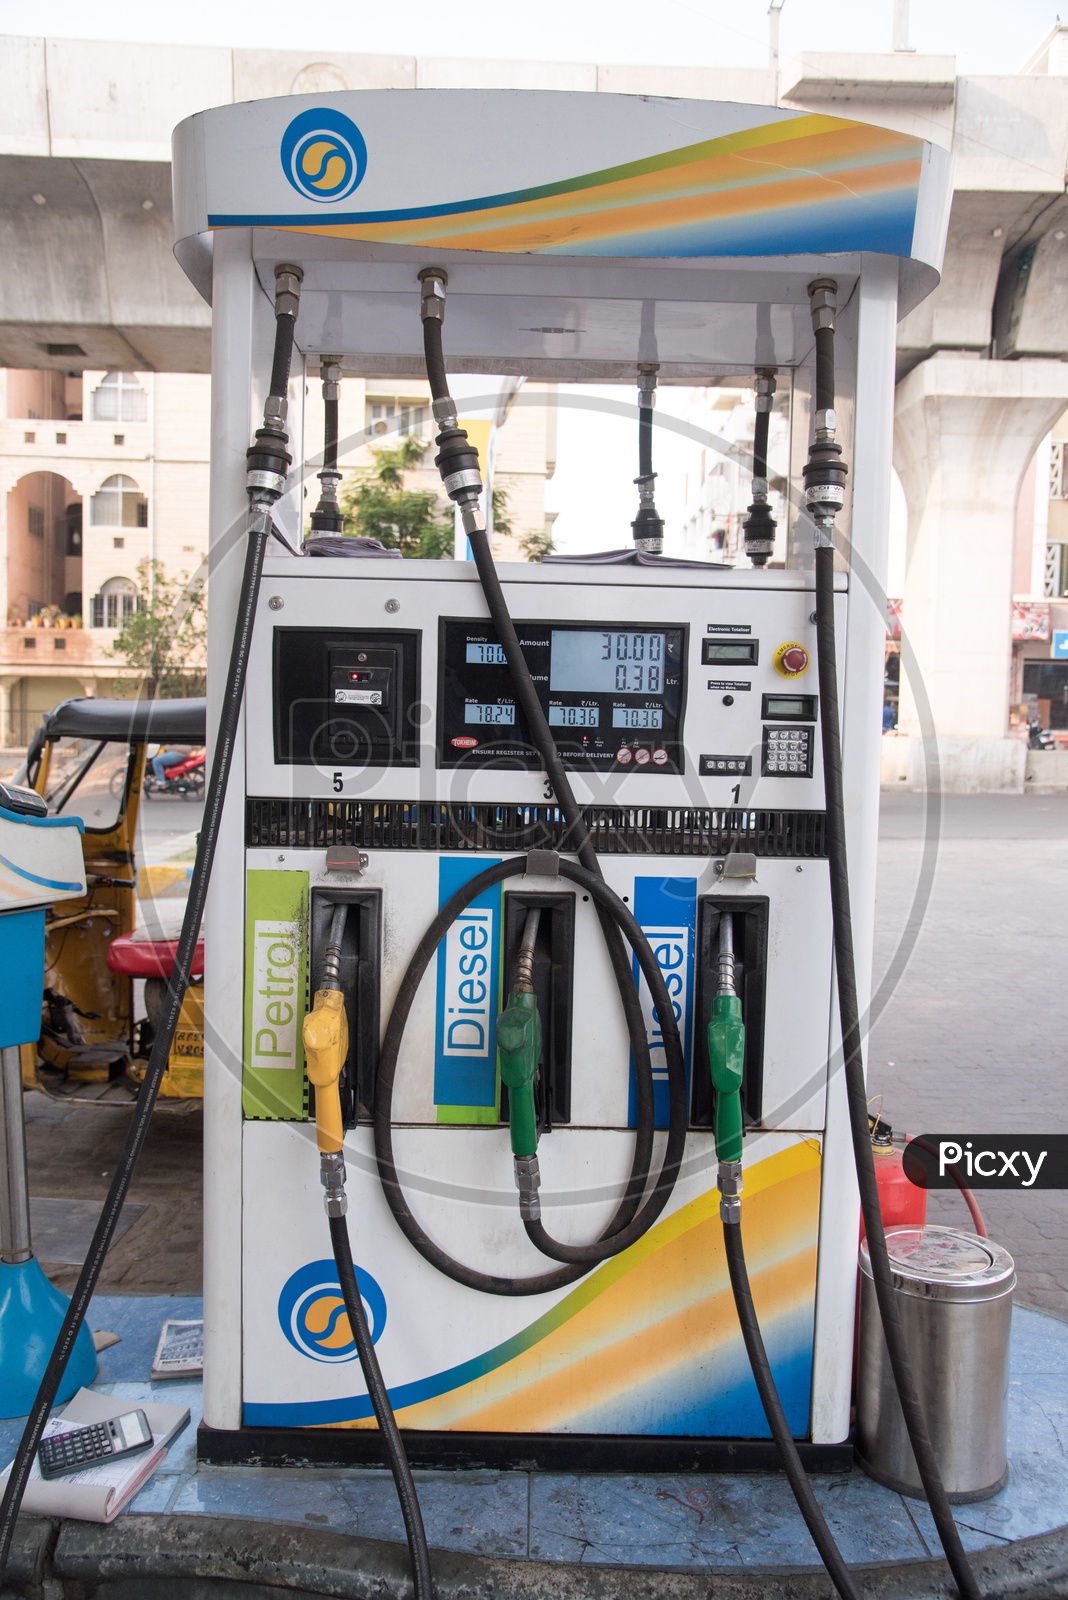 Petrol and Diesel Dispenser at a Fuel Station